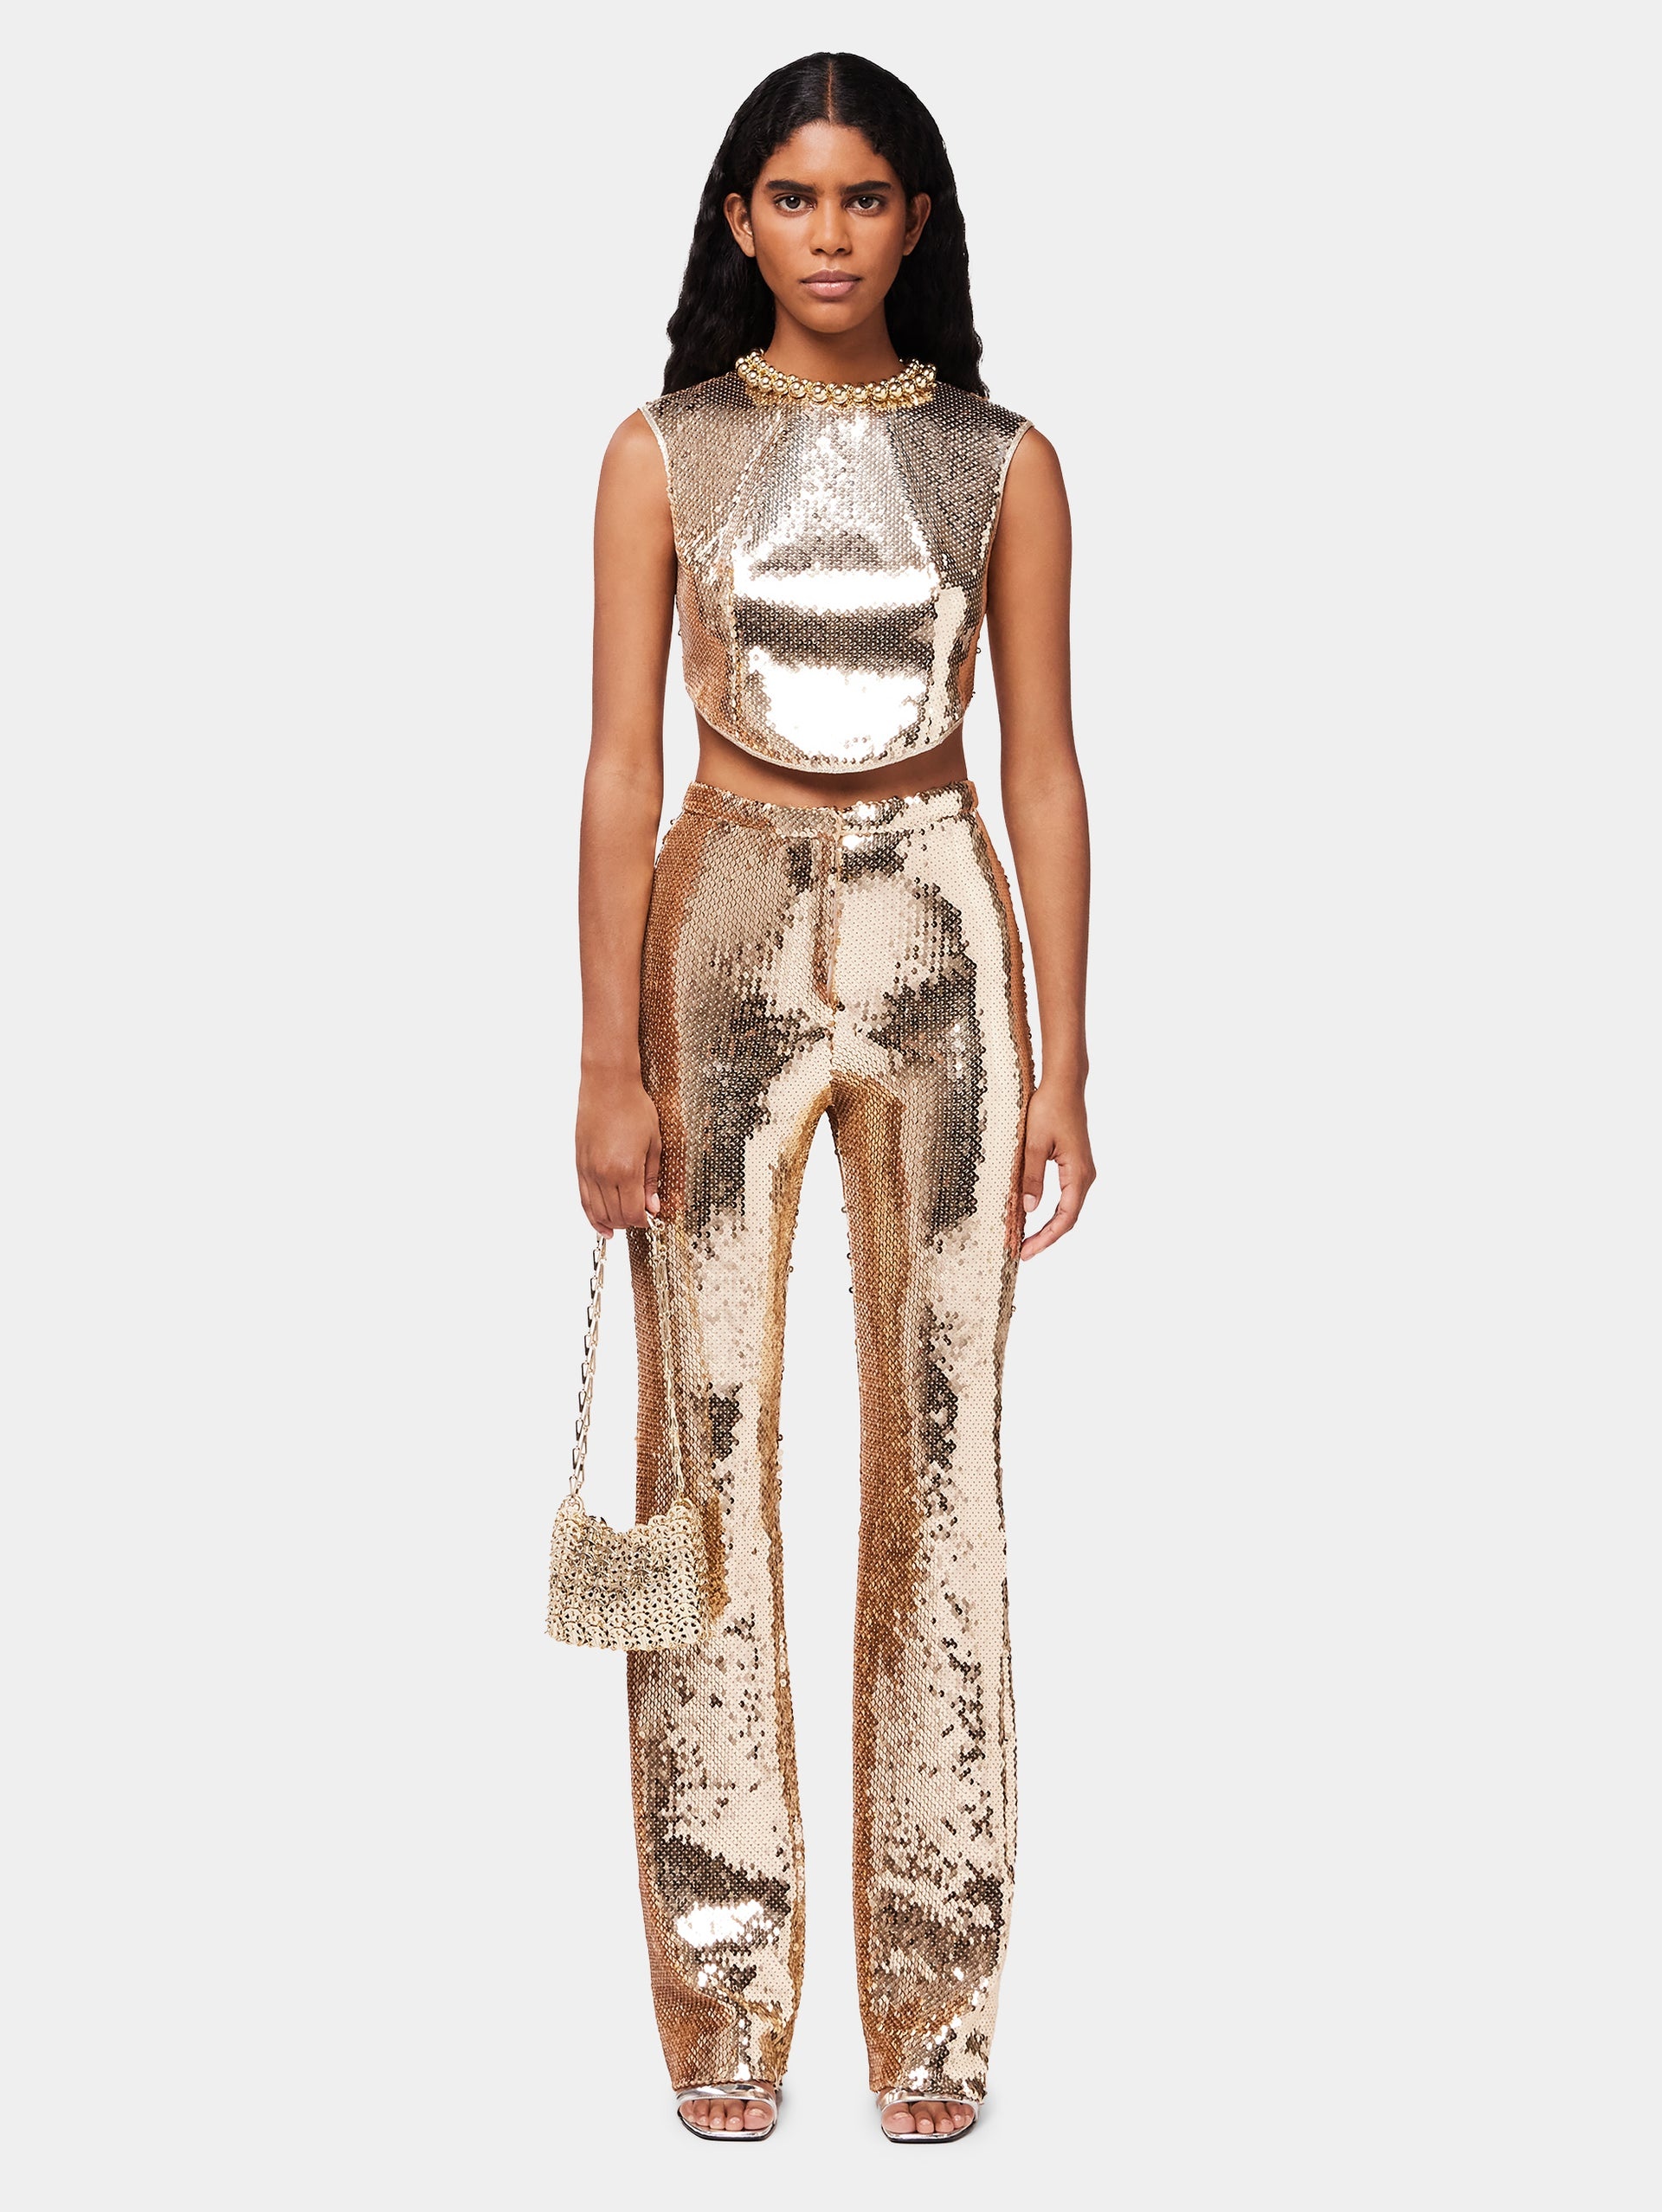 GOLD SEQUINS TROUSERS WITH METALLIC PEARLED DETAIL - 2